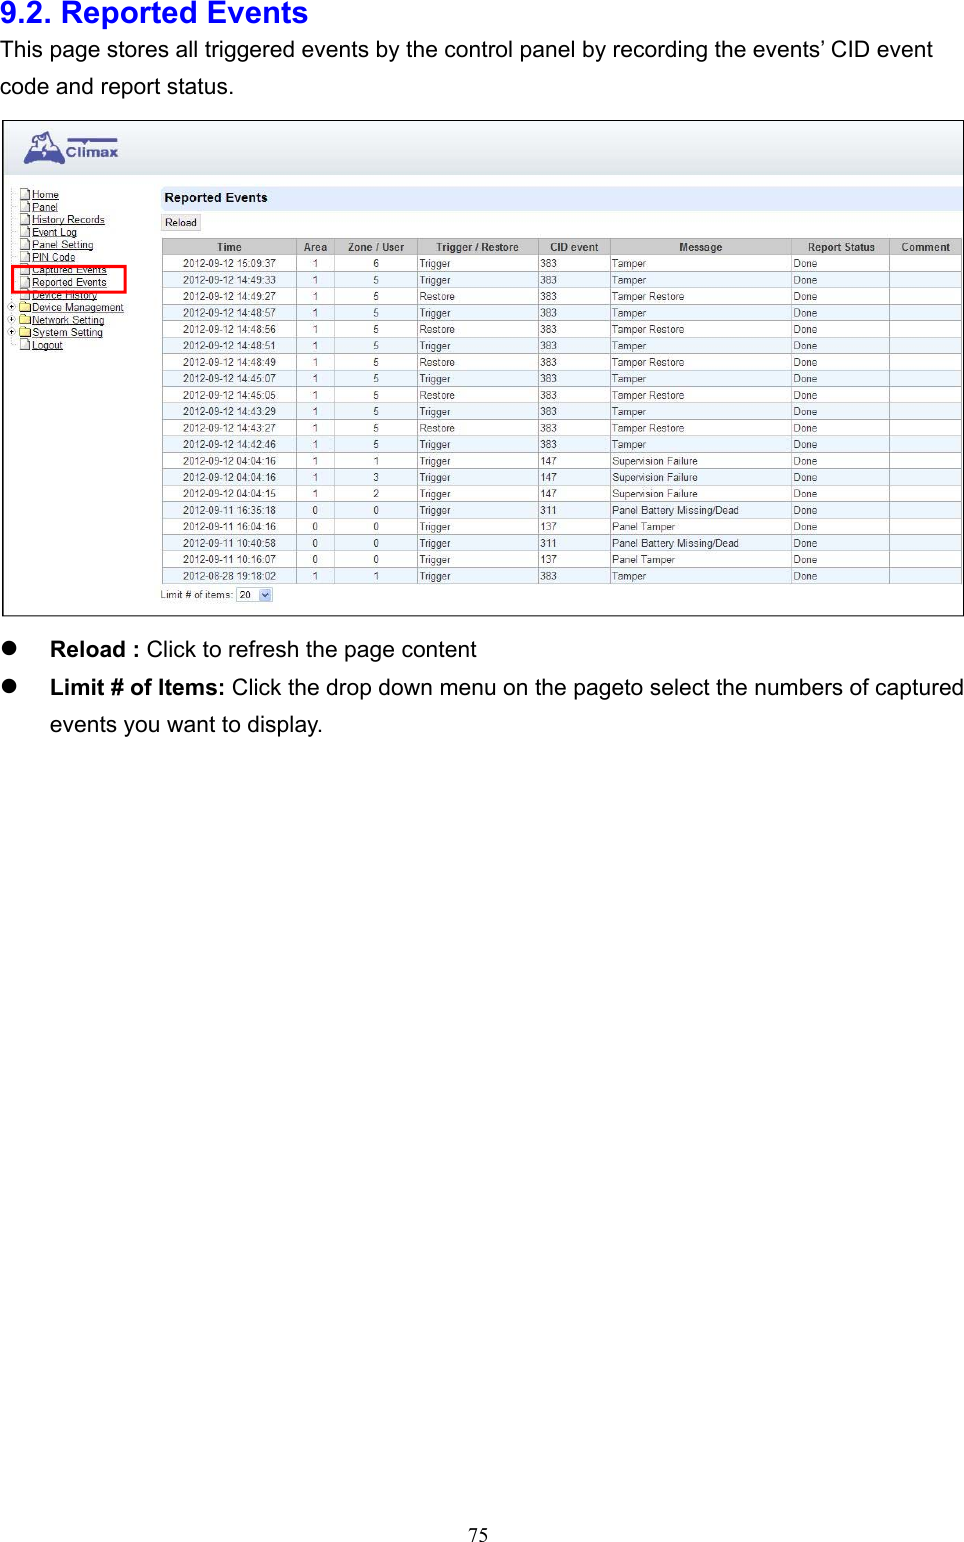  759.2. Reported Events     This page stores all triggered events by the control panel by recording the events’ CID event code and report status.   Reload : Click to refresh the page content      Limit # of Items: Click the drop down menu on the pageto select the numbers of captured events you want to display.                         